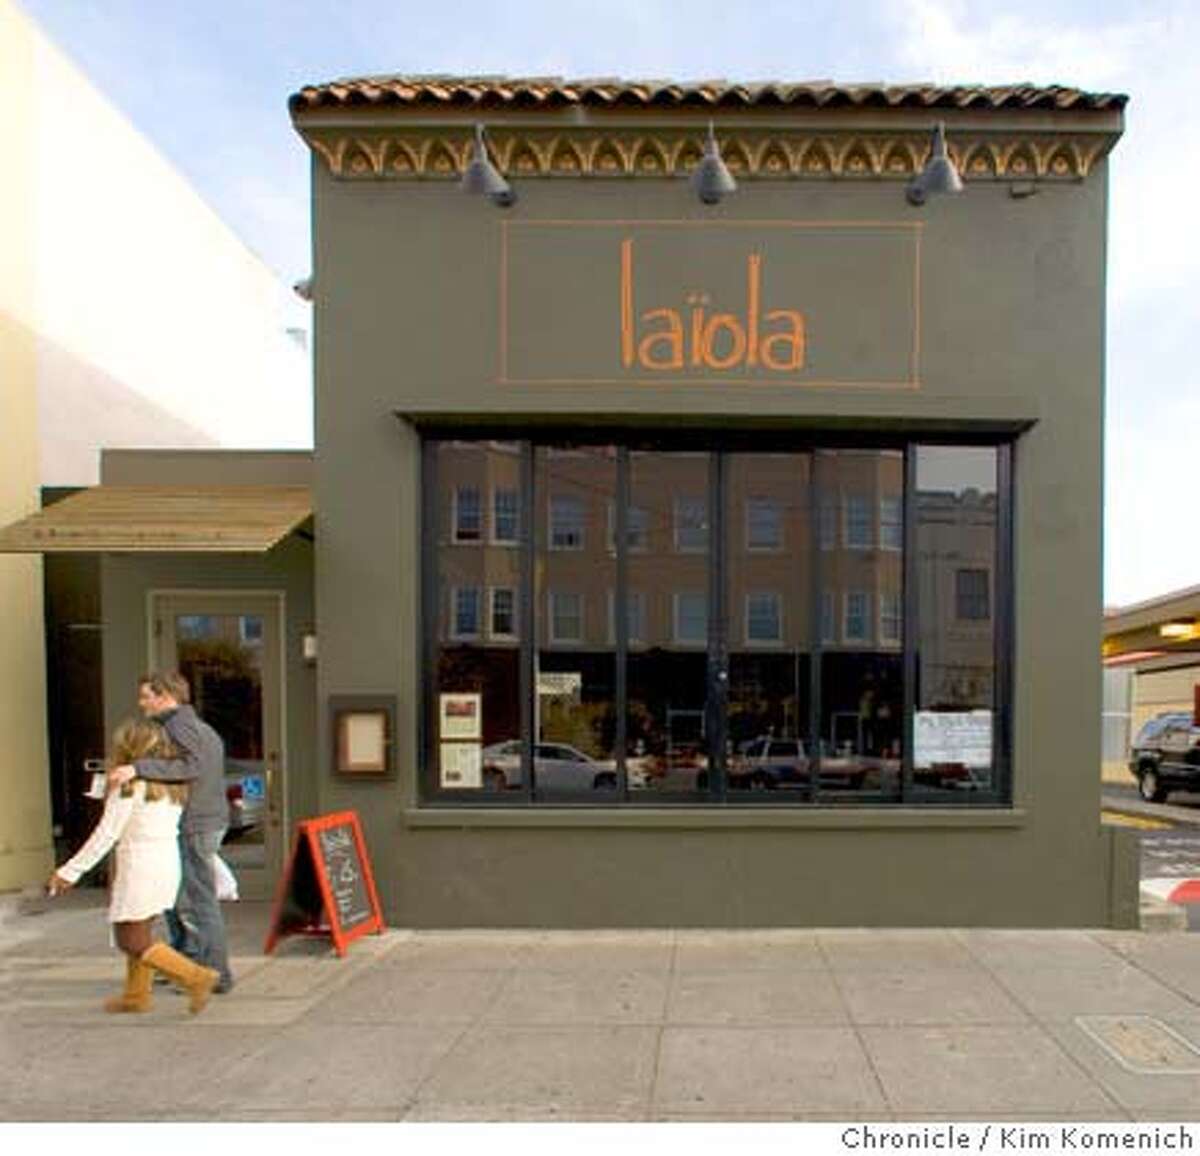 The Laiola restaurant at 2031 Chestnut St. in San Francisco, Calif., is photographed on April 5, 2008. Photo by Kim Komenich / San Francisco Chronicle